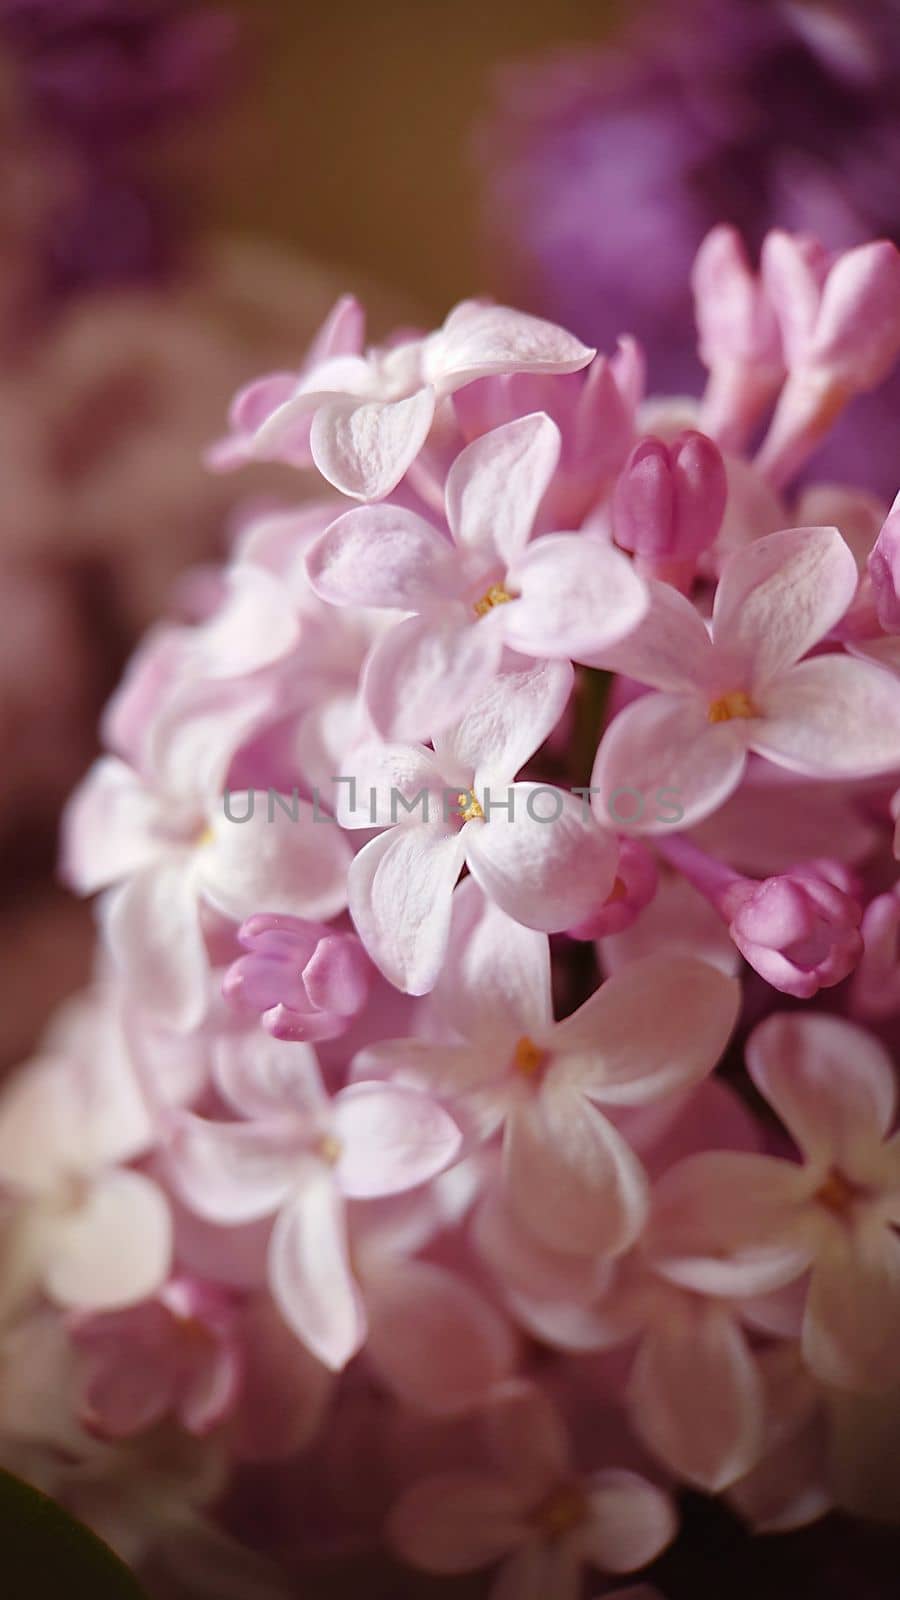 Pale lilac petals of blooming lilac close-up. Macrophotography.Texture or background